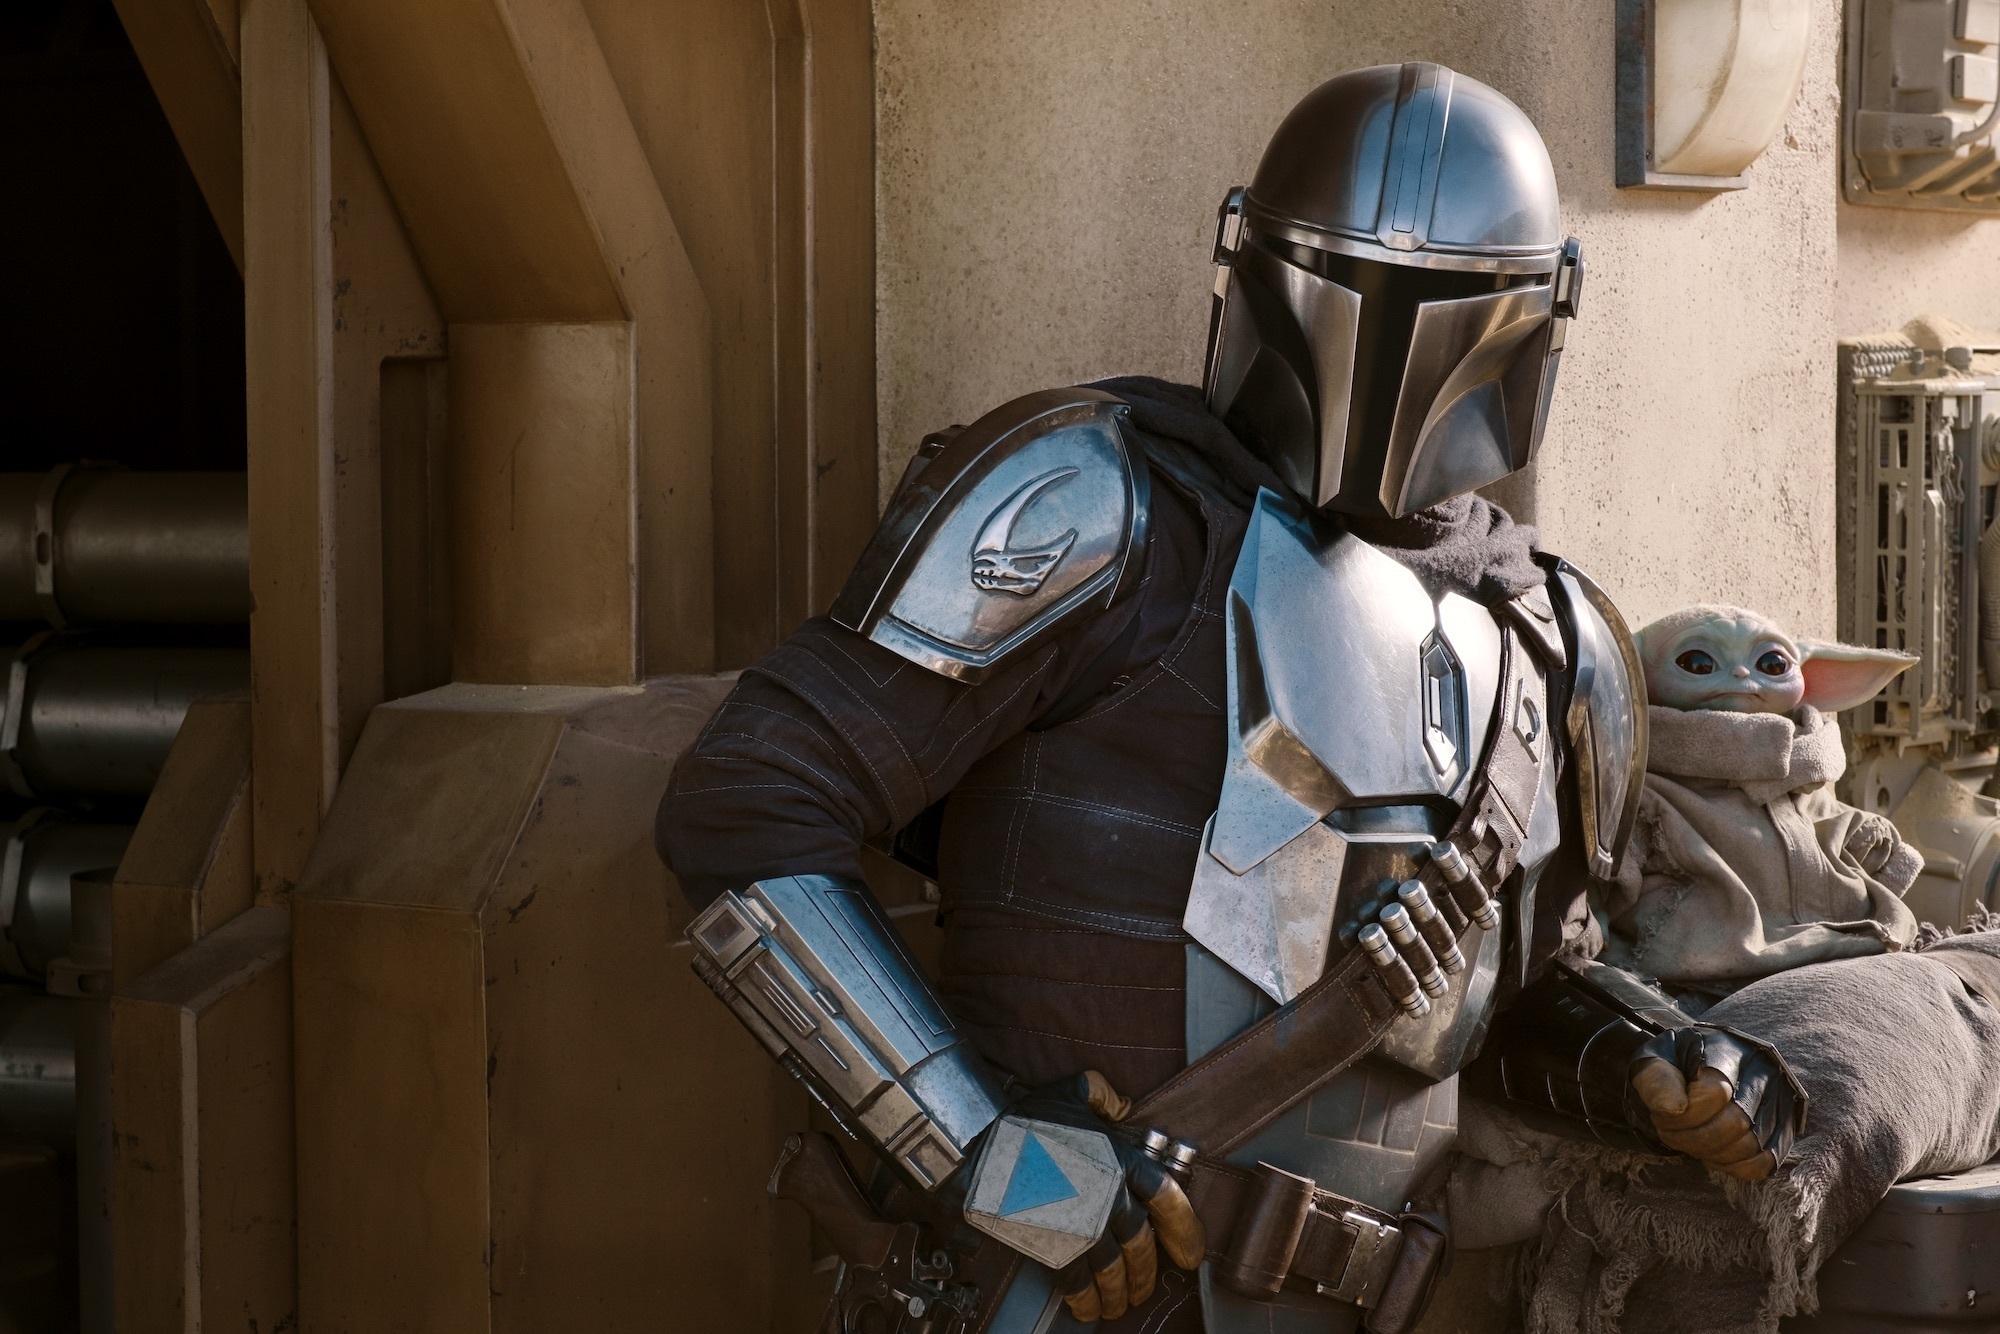 Din Djarin and the Child in 'The Mandalorian' on Disney+